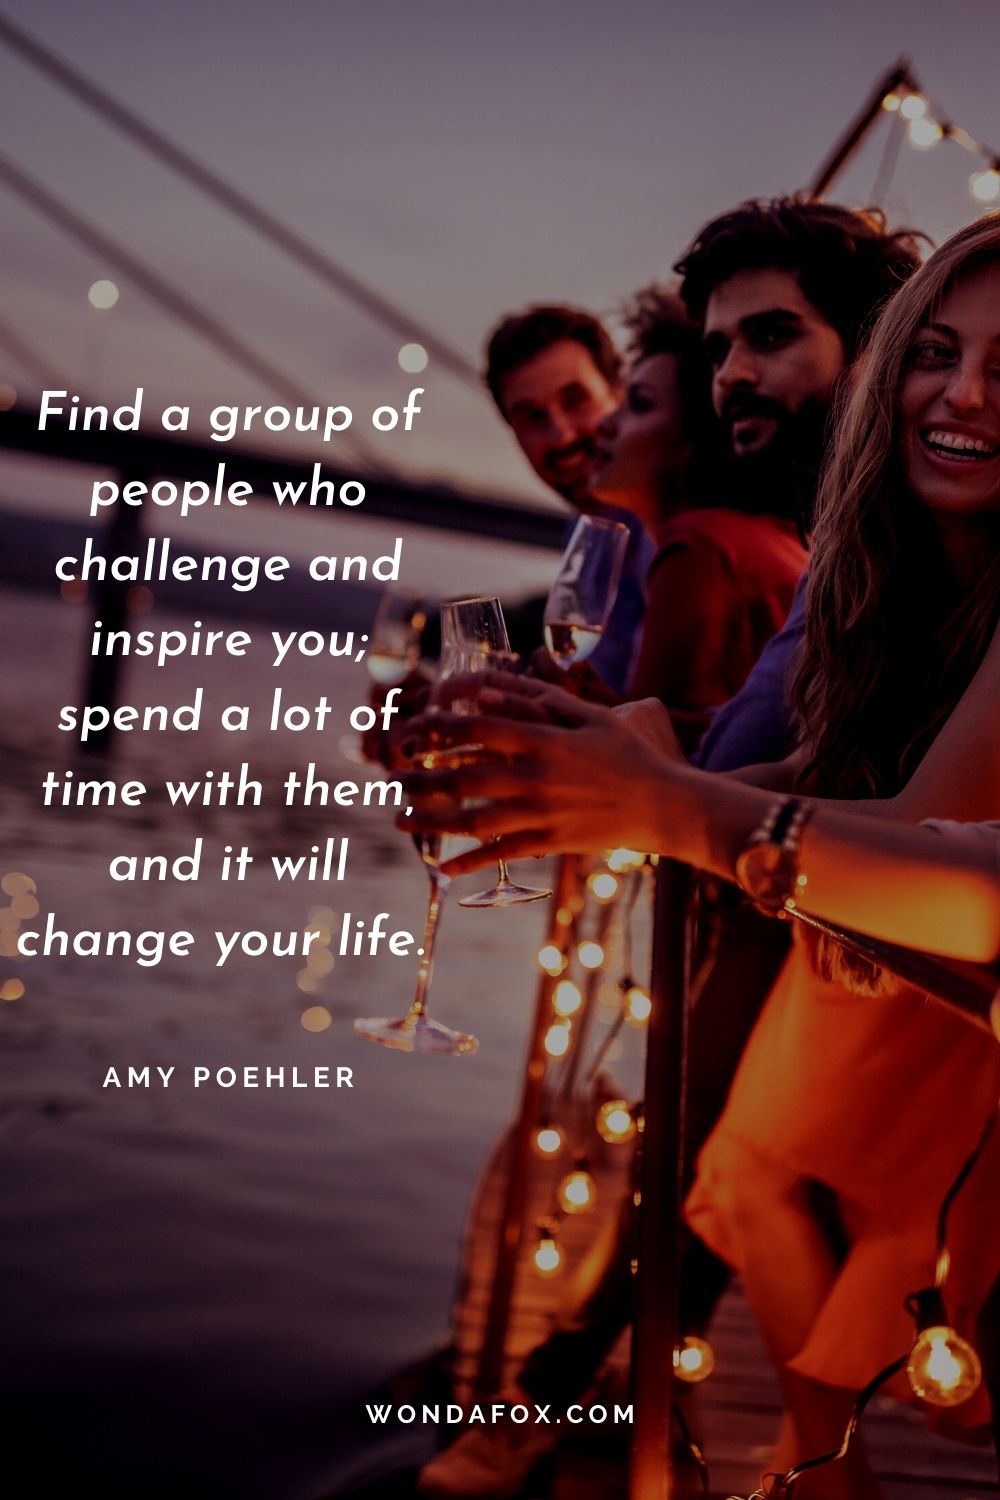 Find a group of people who challenge and inspire you; spend a lot of time with them, and it will change your life.